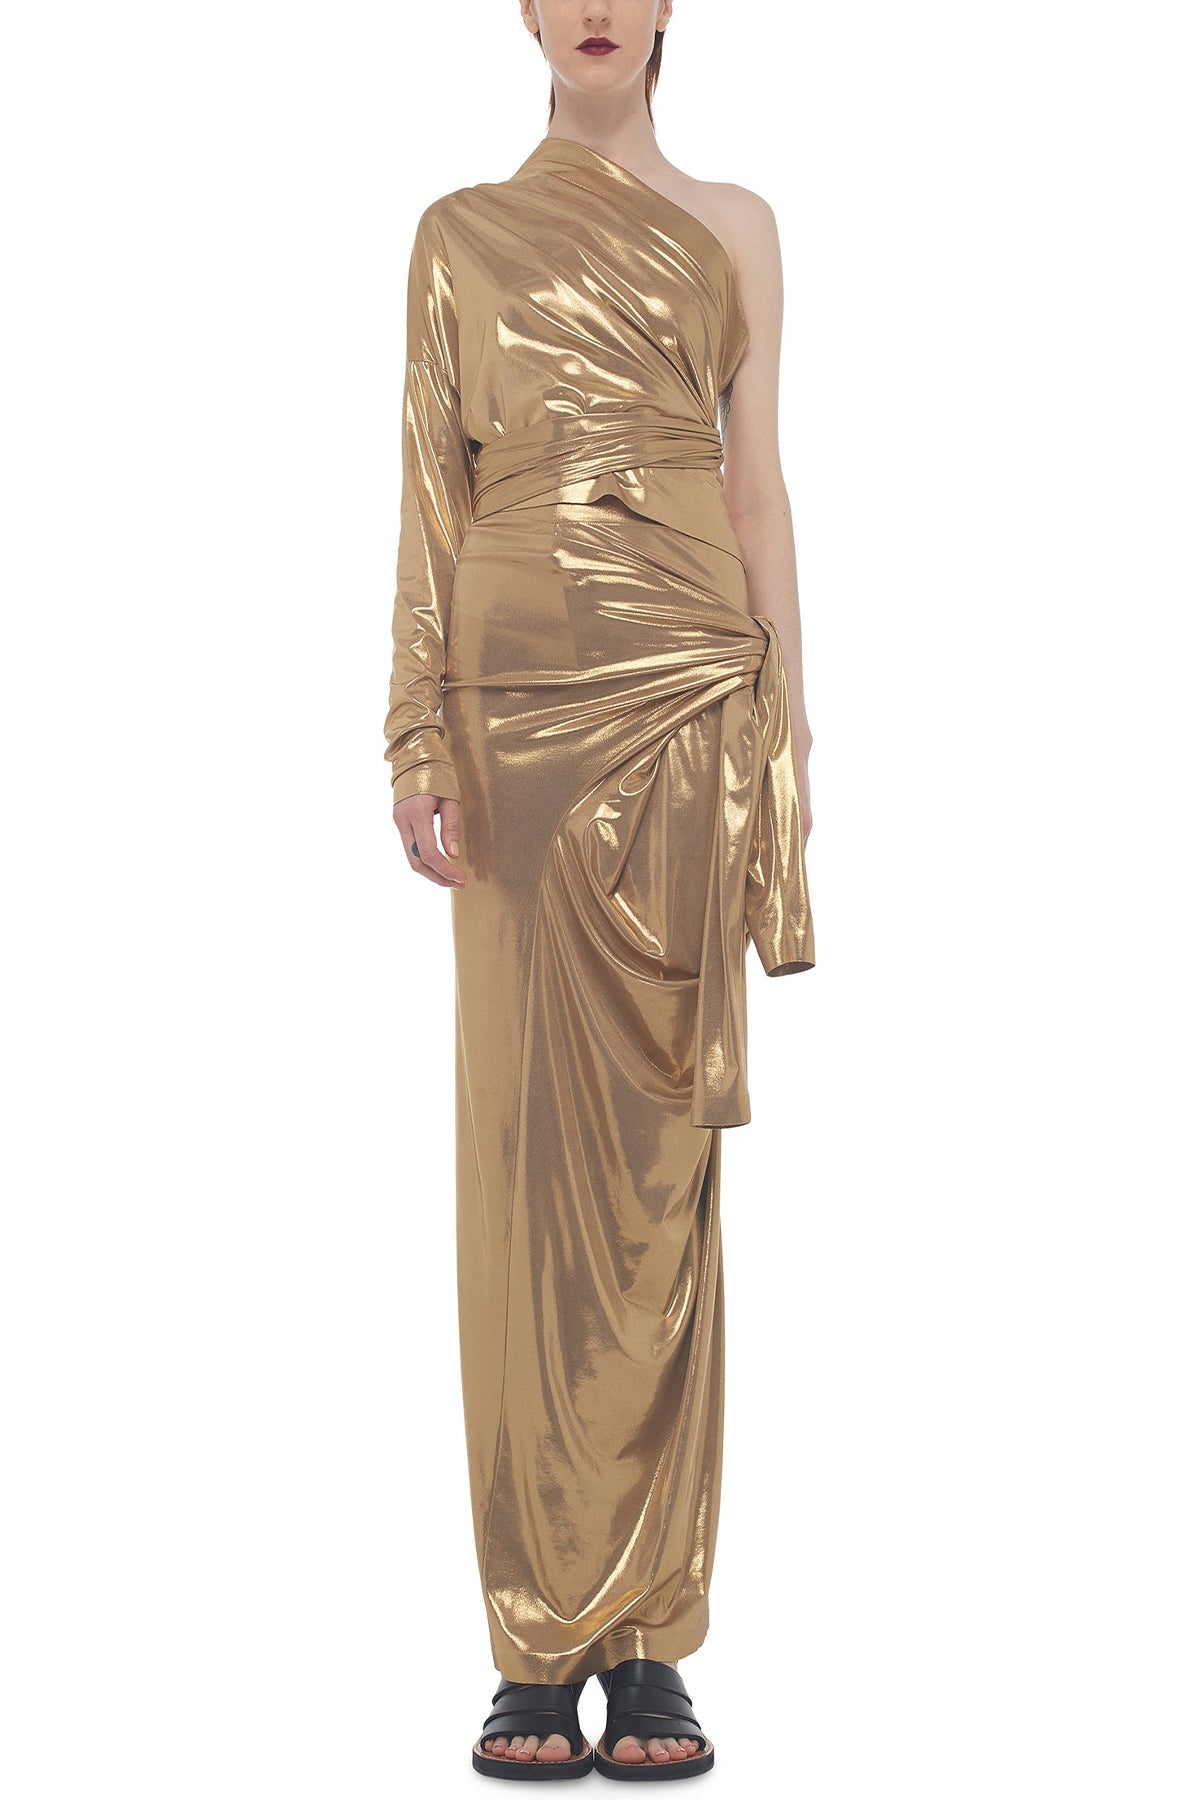 All in One Dress to Midcalf in Gold - shop-olivia.com